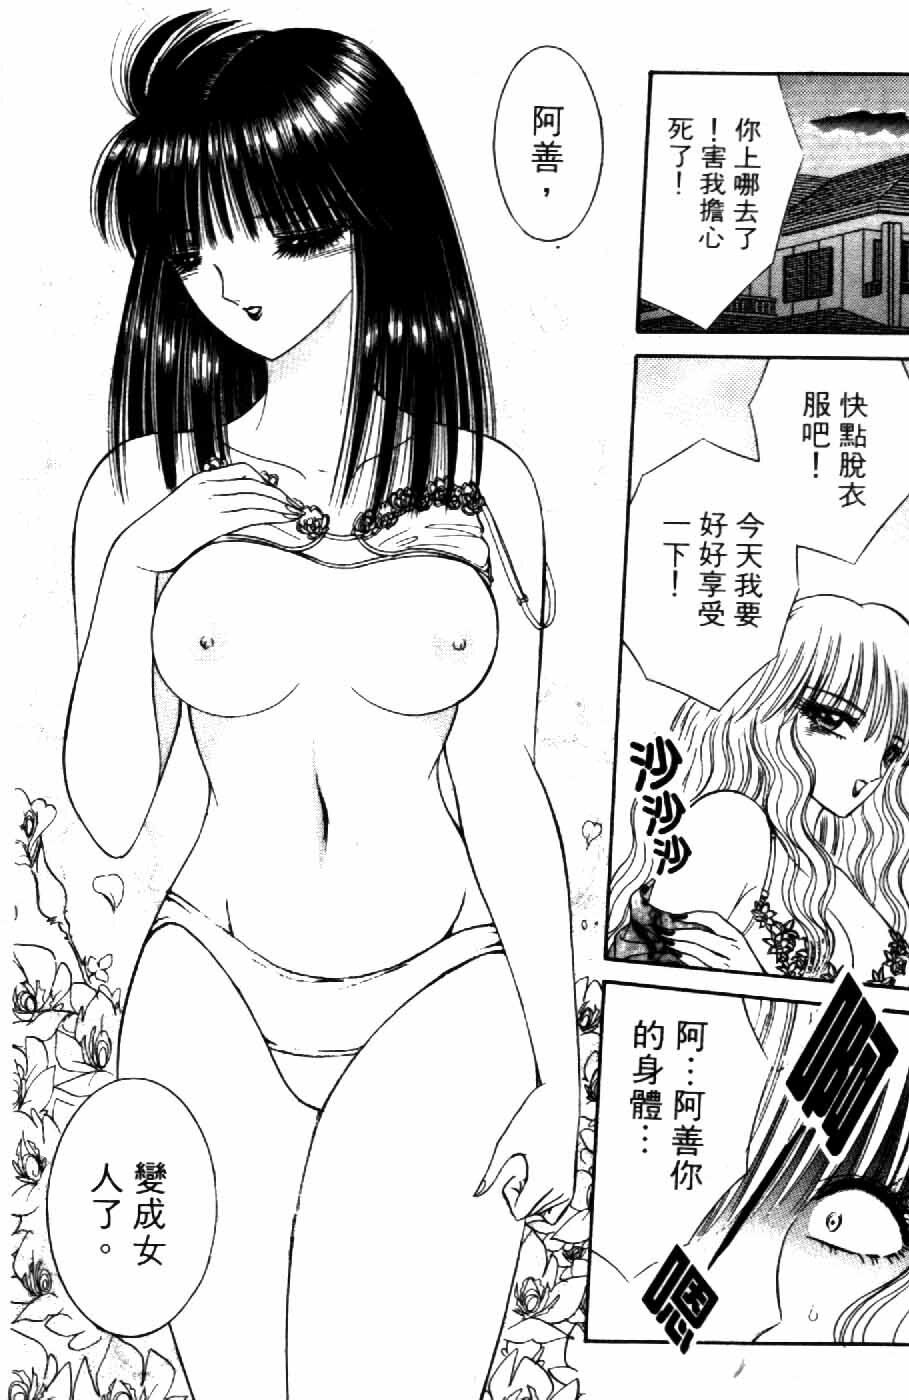 [Senno Knife] Ouma ga Horror Show 2 - Trans Sexual Special Show 2 | 顫慄博覽會 2 [Chinese] page 22 full